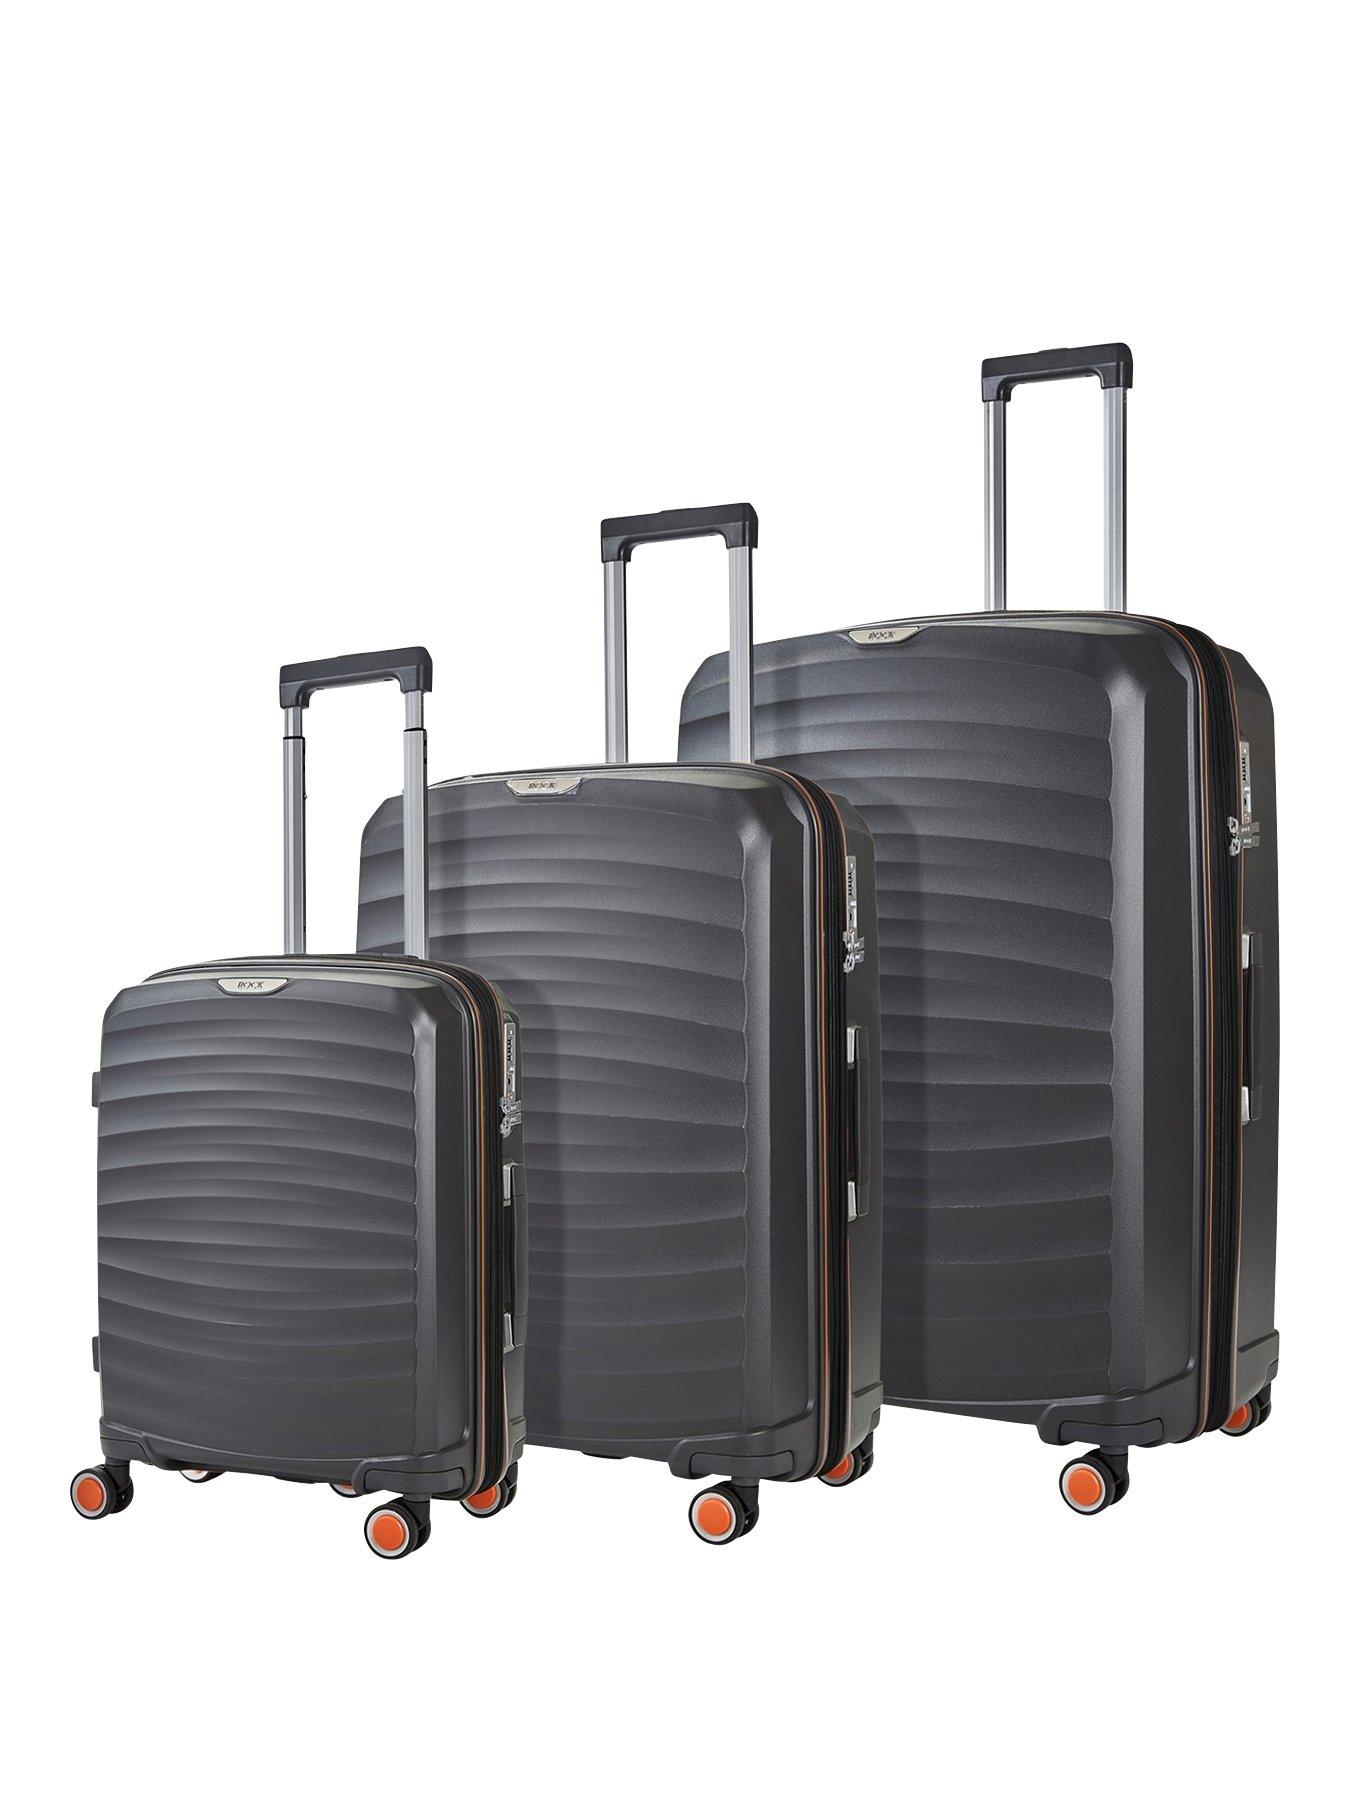 Rock Luggage Sunwave 8-Wheel Suitcases - 3 piece Set - Charcoal | very ...